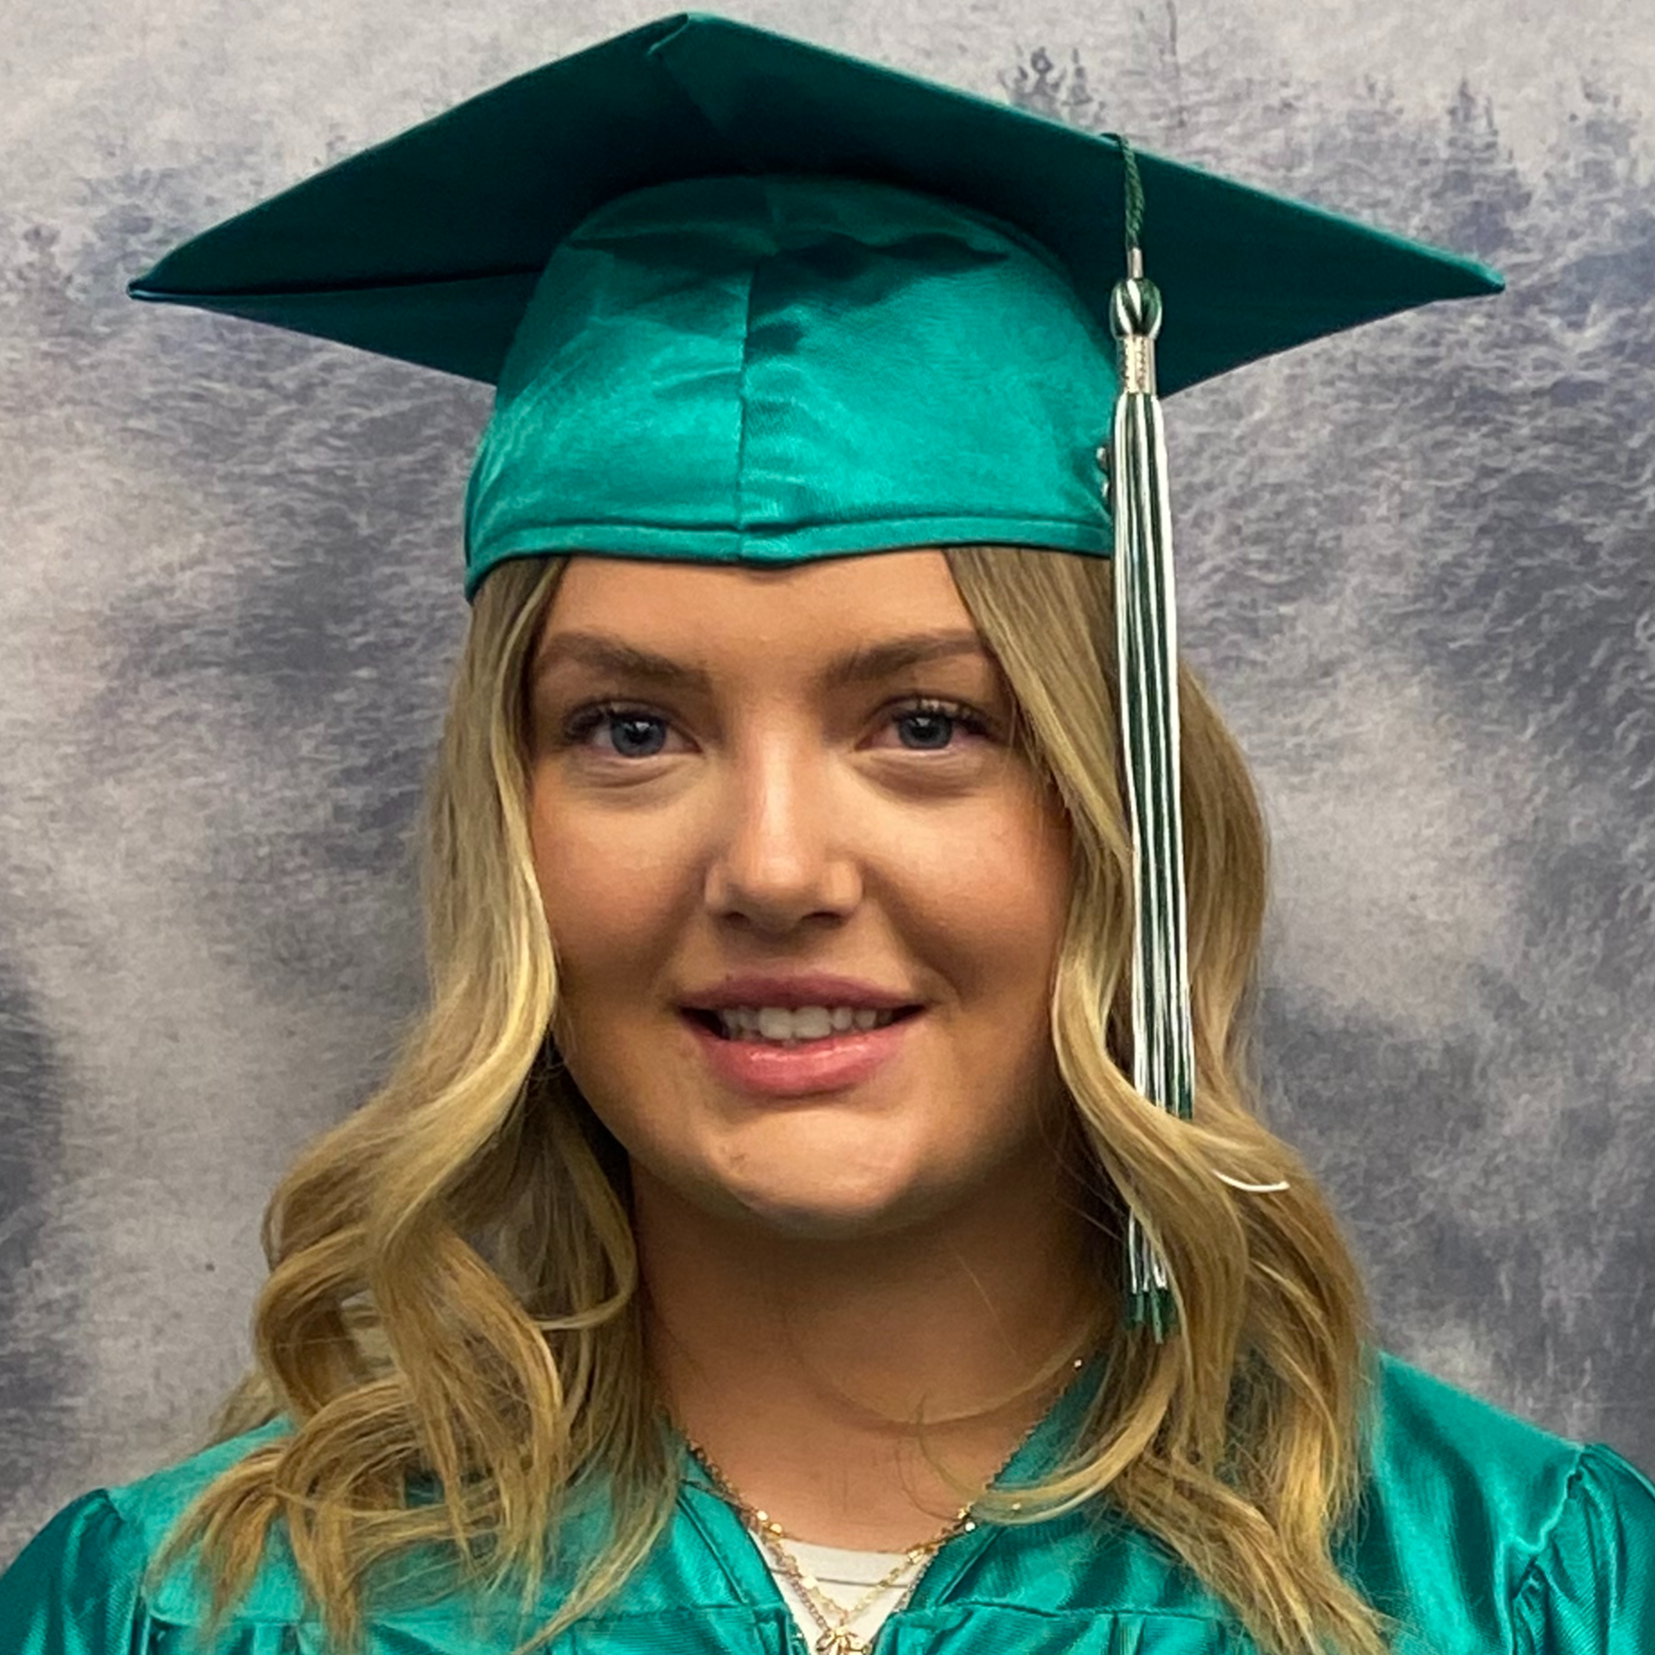 Brynna Smith in green graduation robes and cap